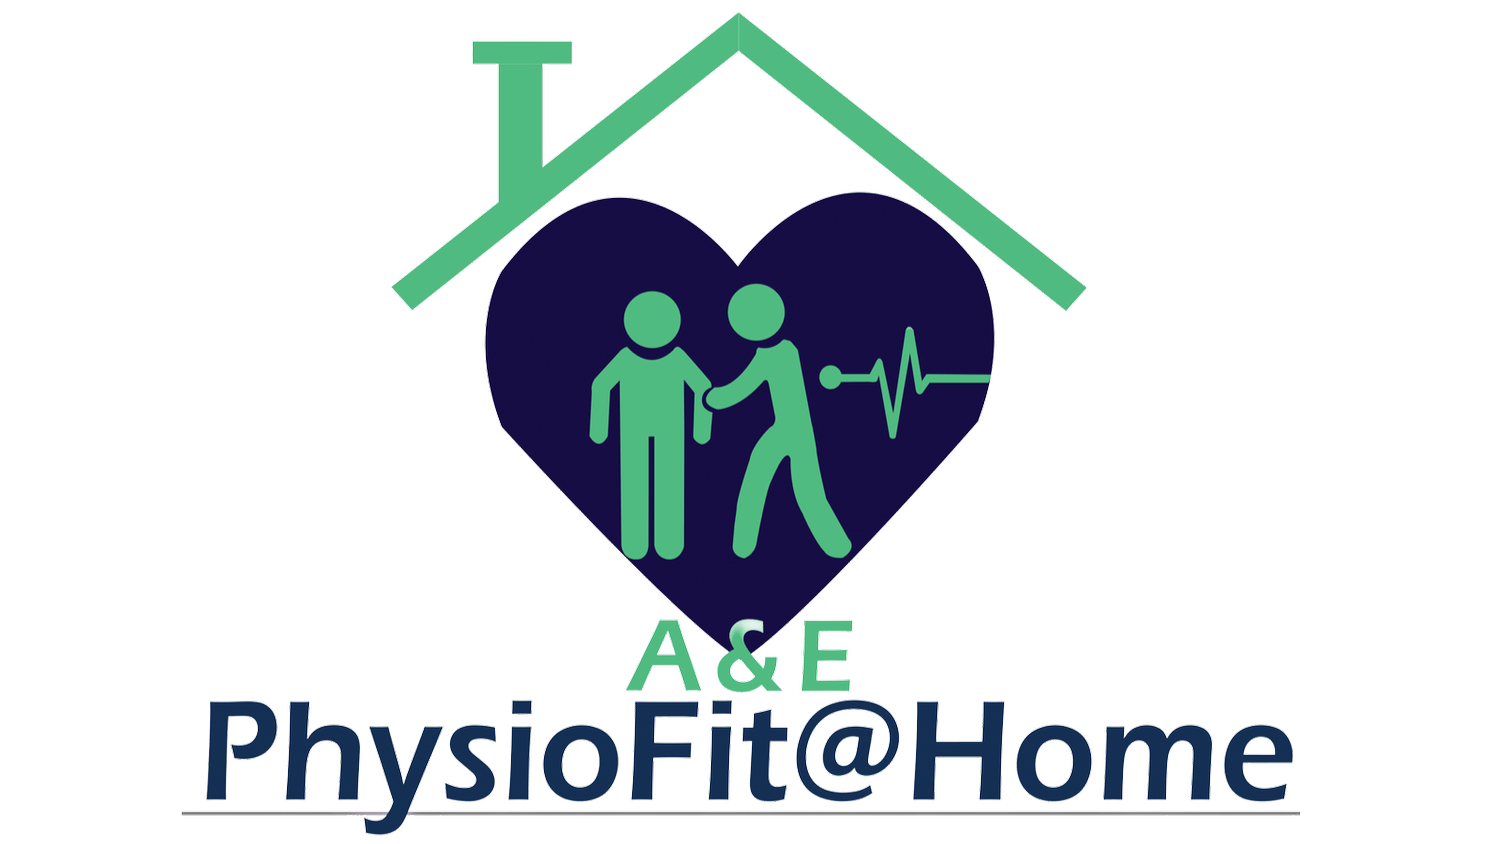 In Home Private Physical Therapy | Boston and North Shore Massachusetts | A&amp;E PhysioFit at Home